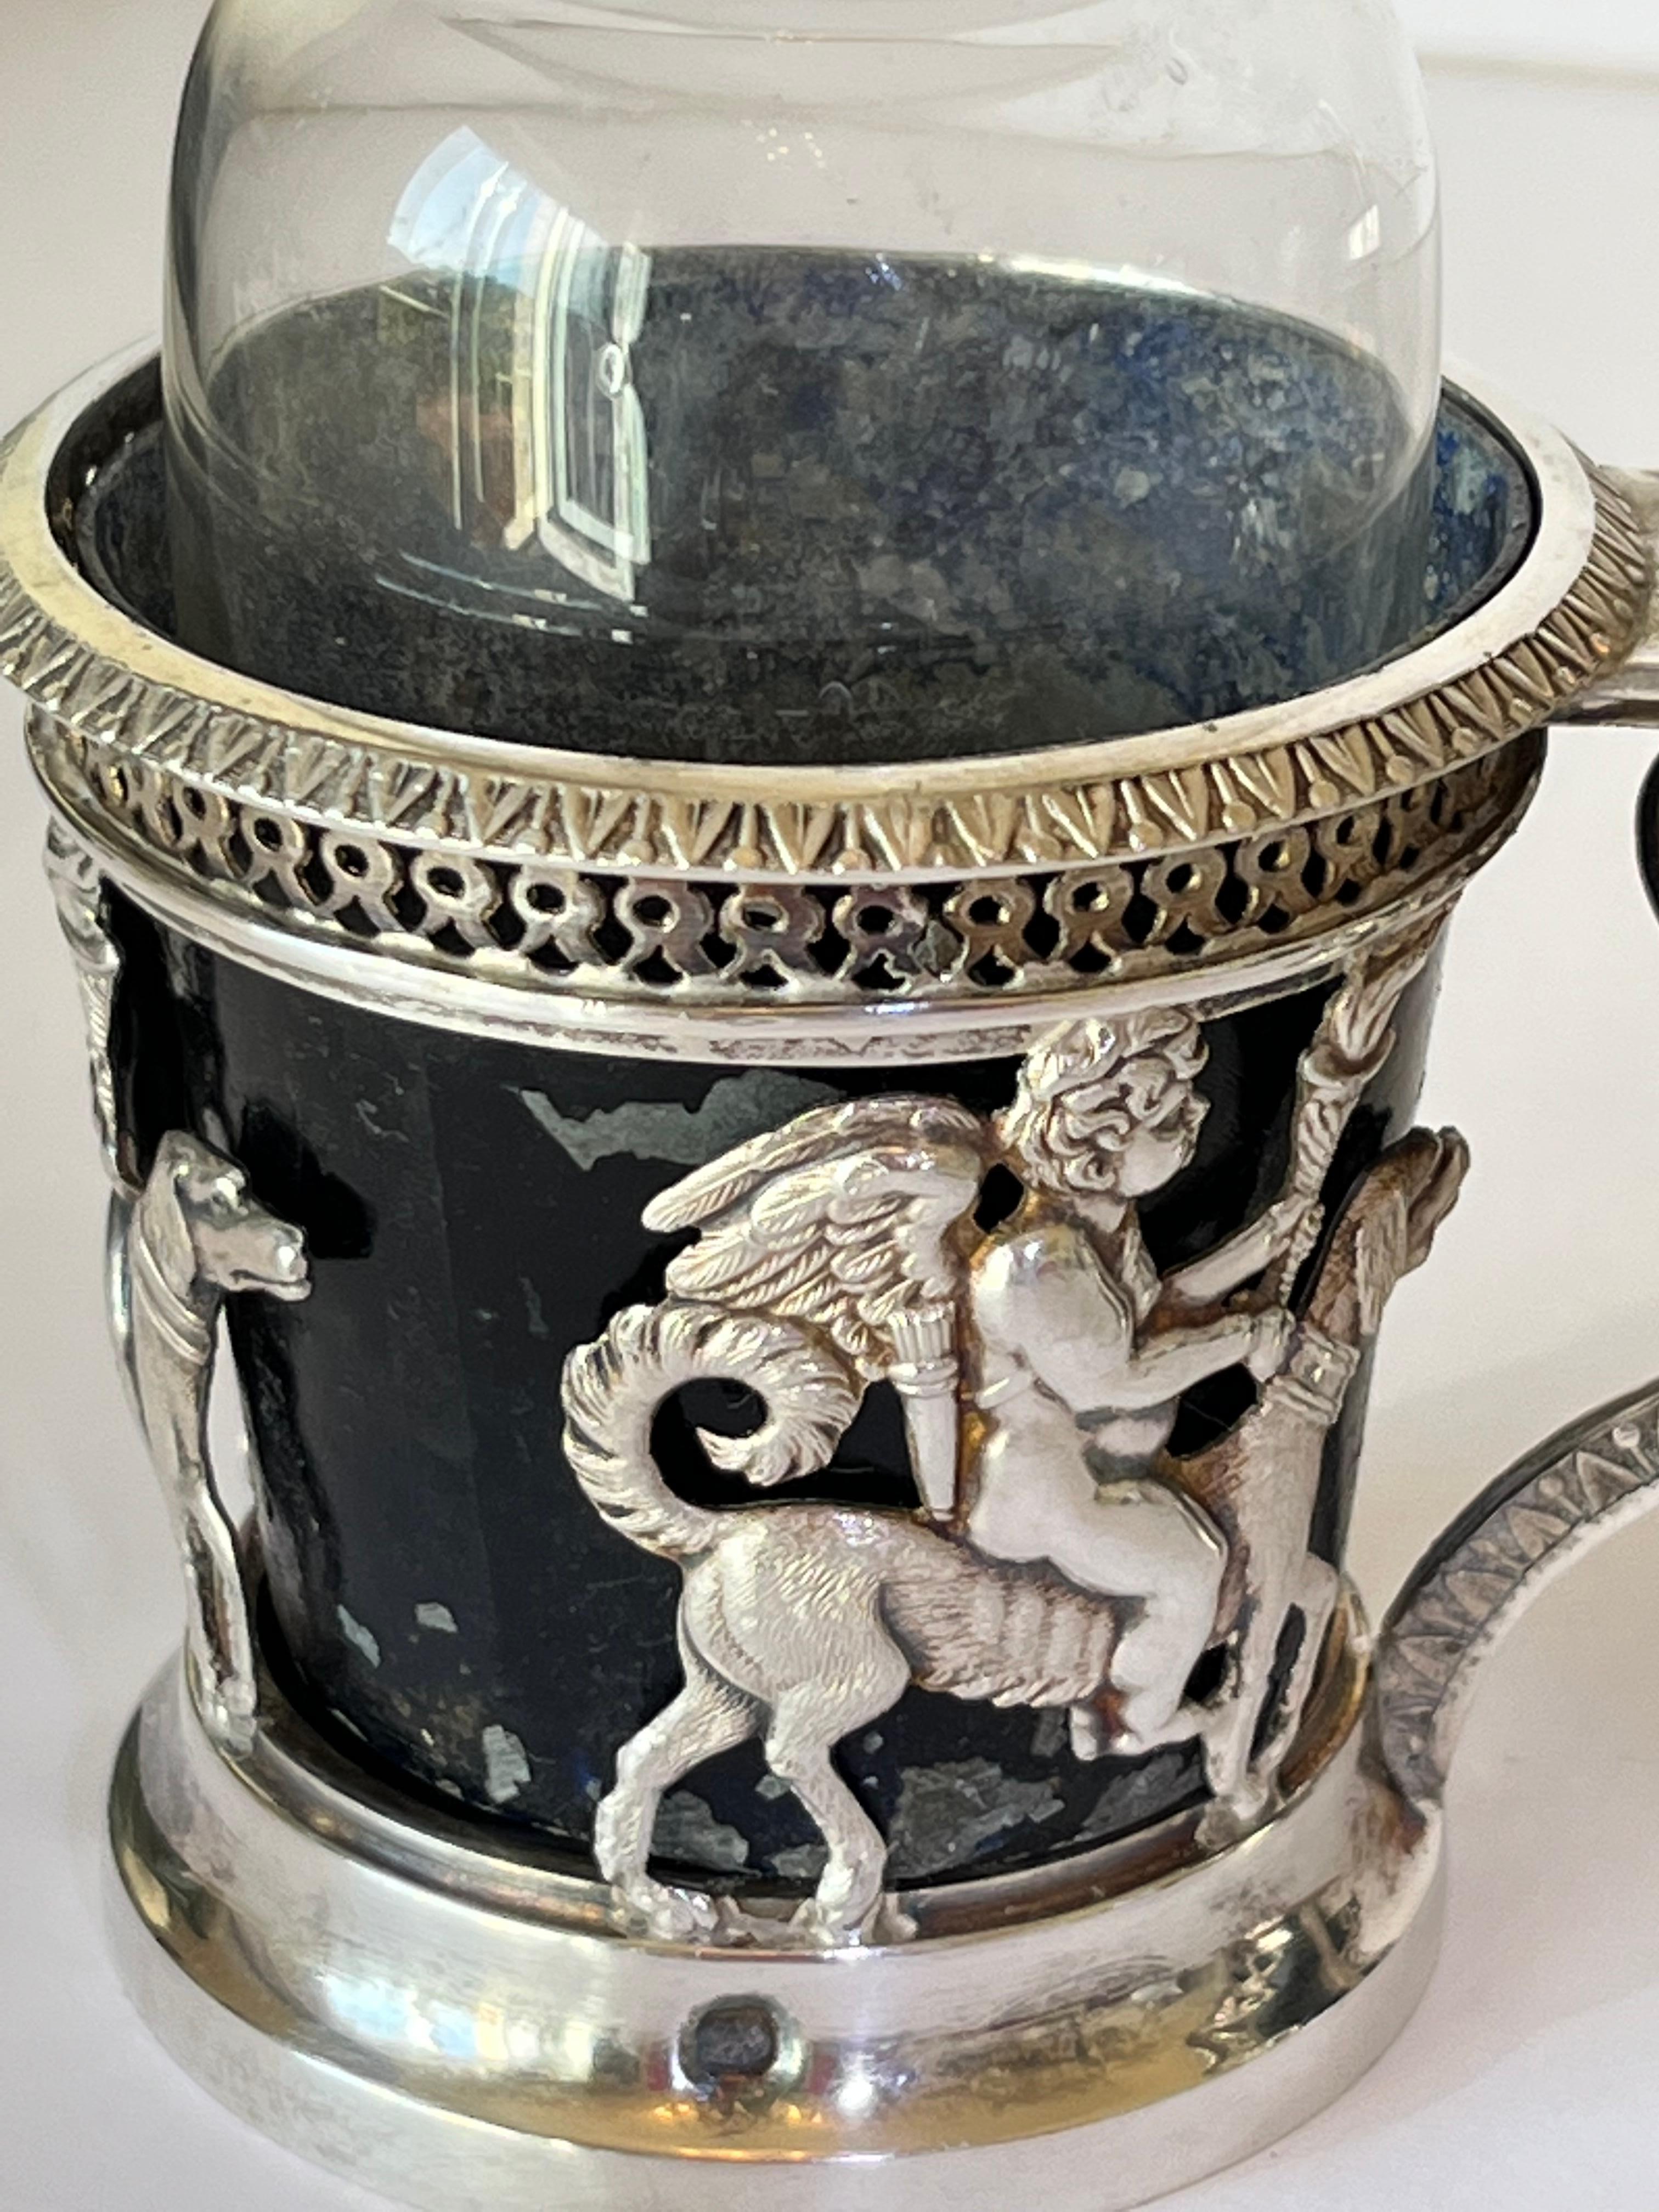 Exquisite set of oil and Vinegar LXVI Silver and cristal.
Neo classic design animal and winged children figure chiseled in a very delicate way.
The central part with draperies around the column ending with two dogs heads.
Extremely elegant and